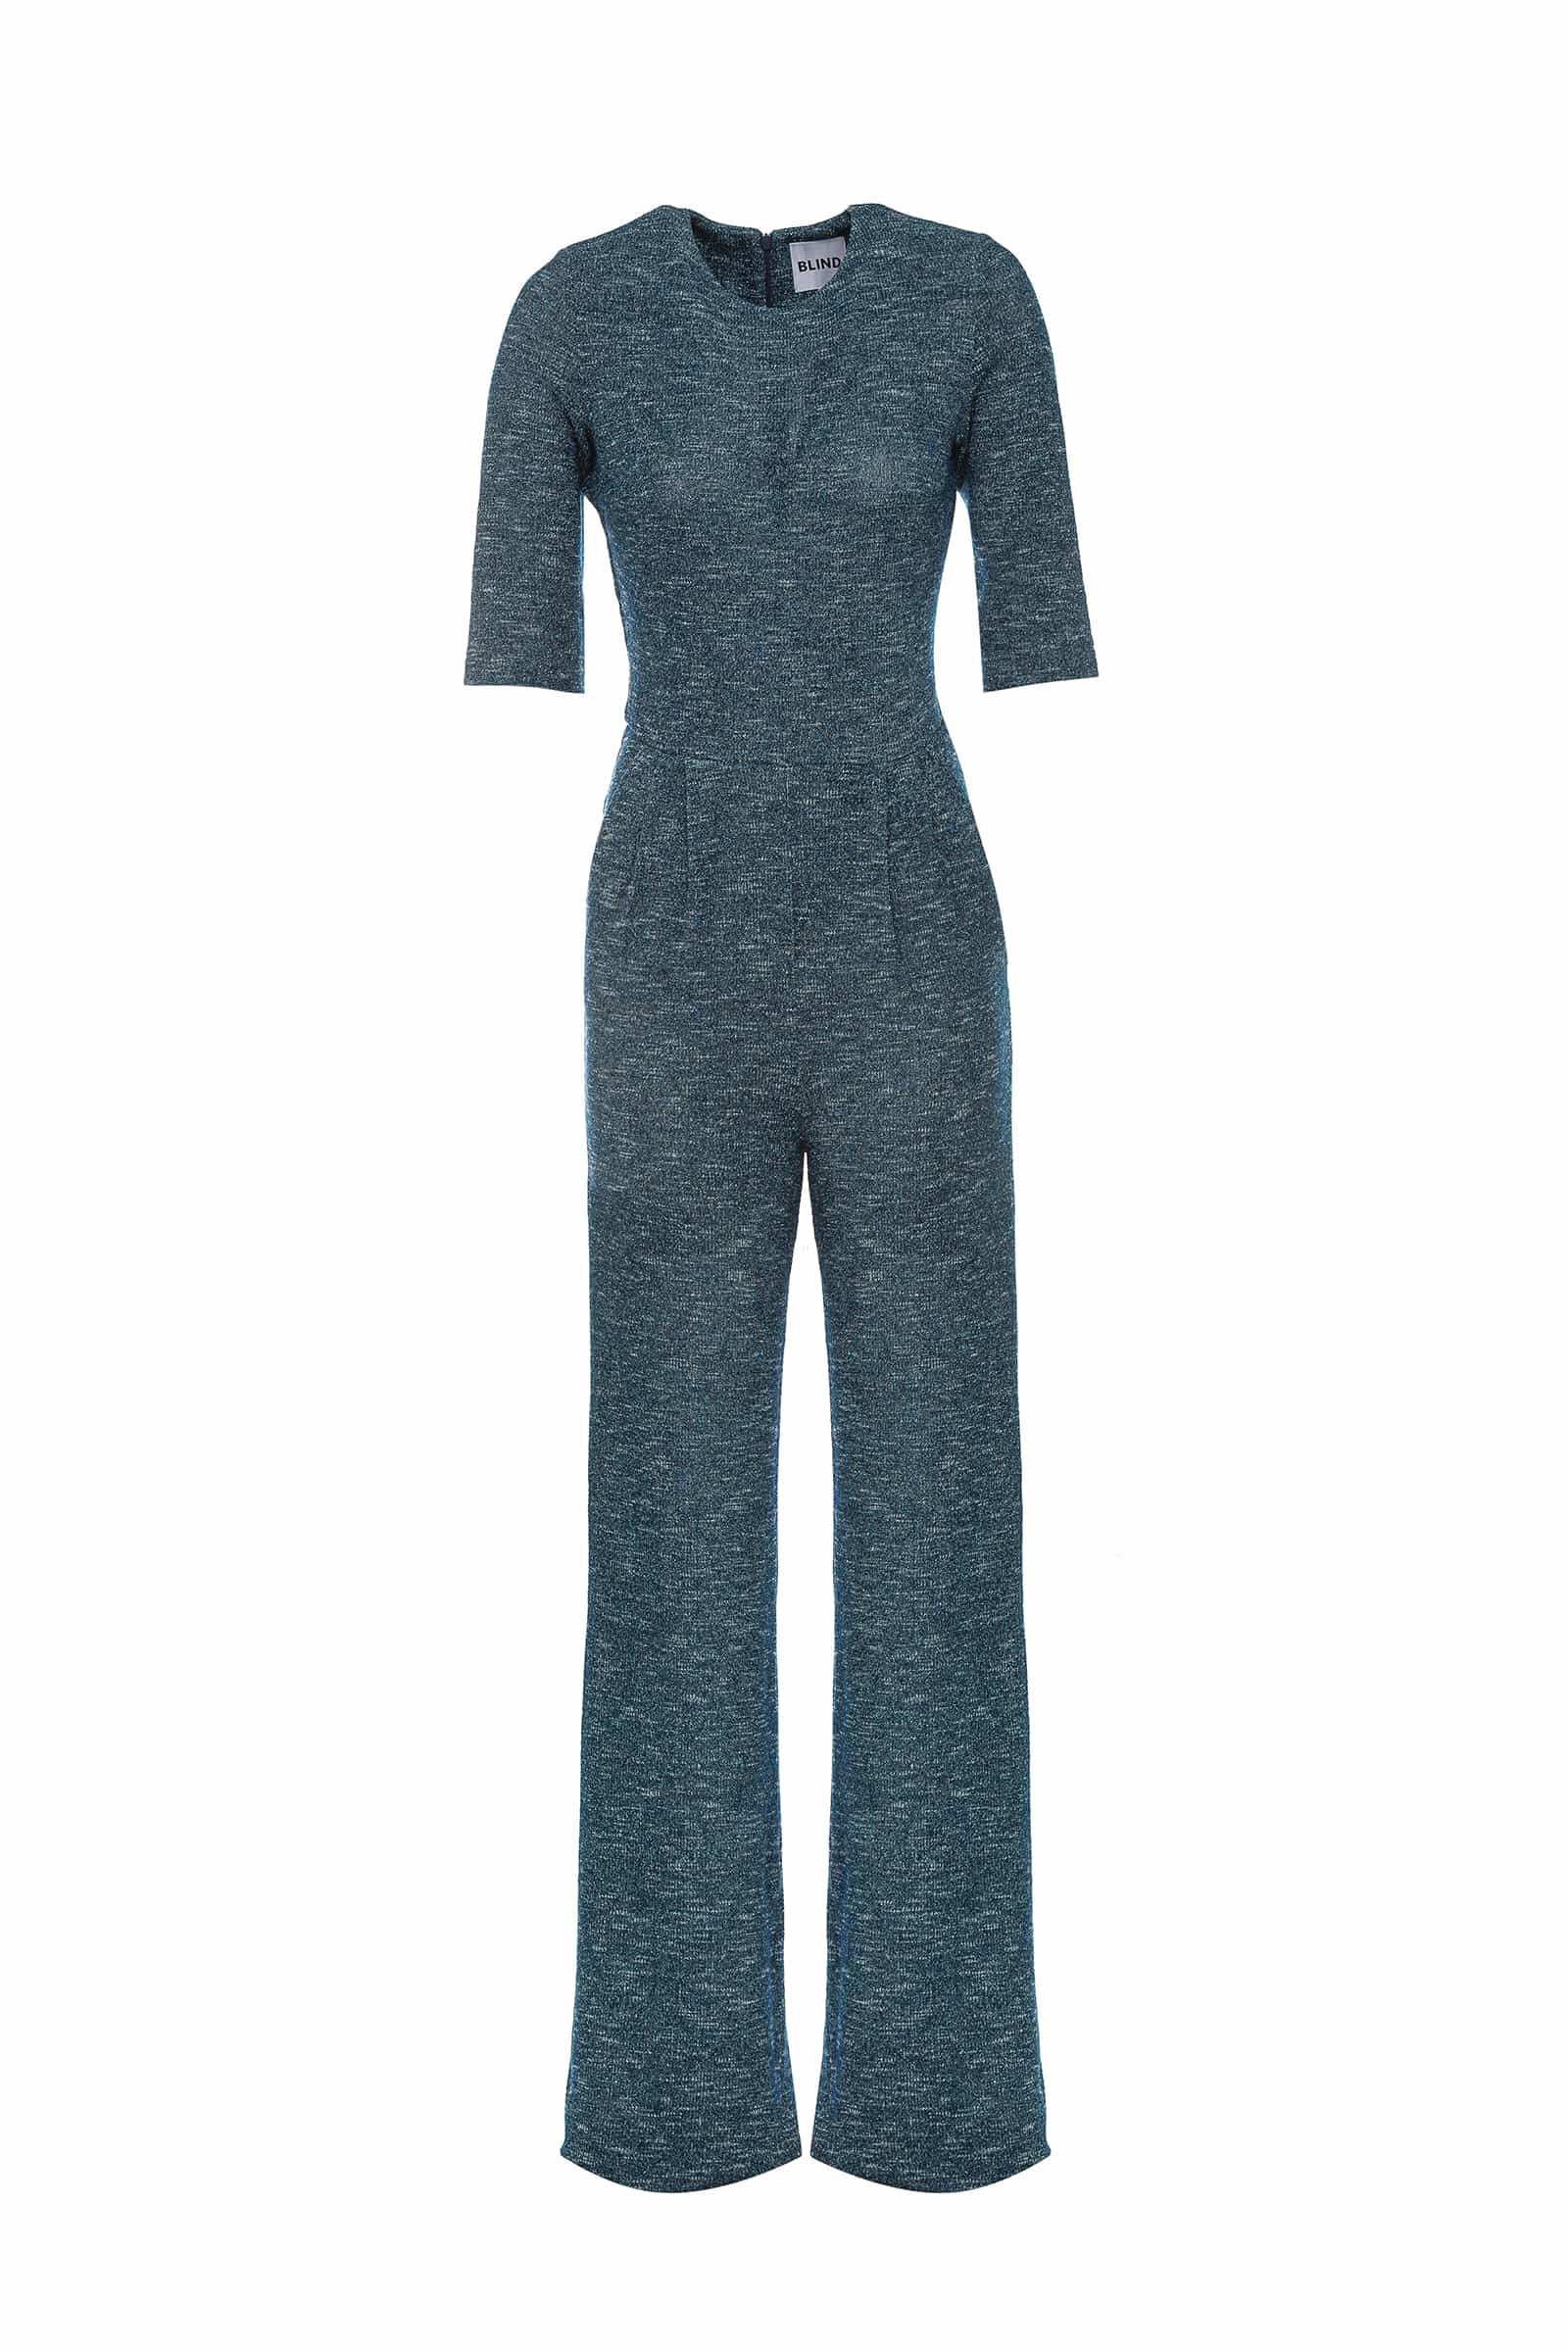 Knitted suit (jumpsuit and cardigan with belt)